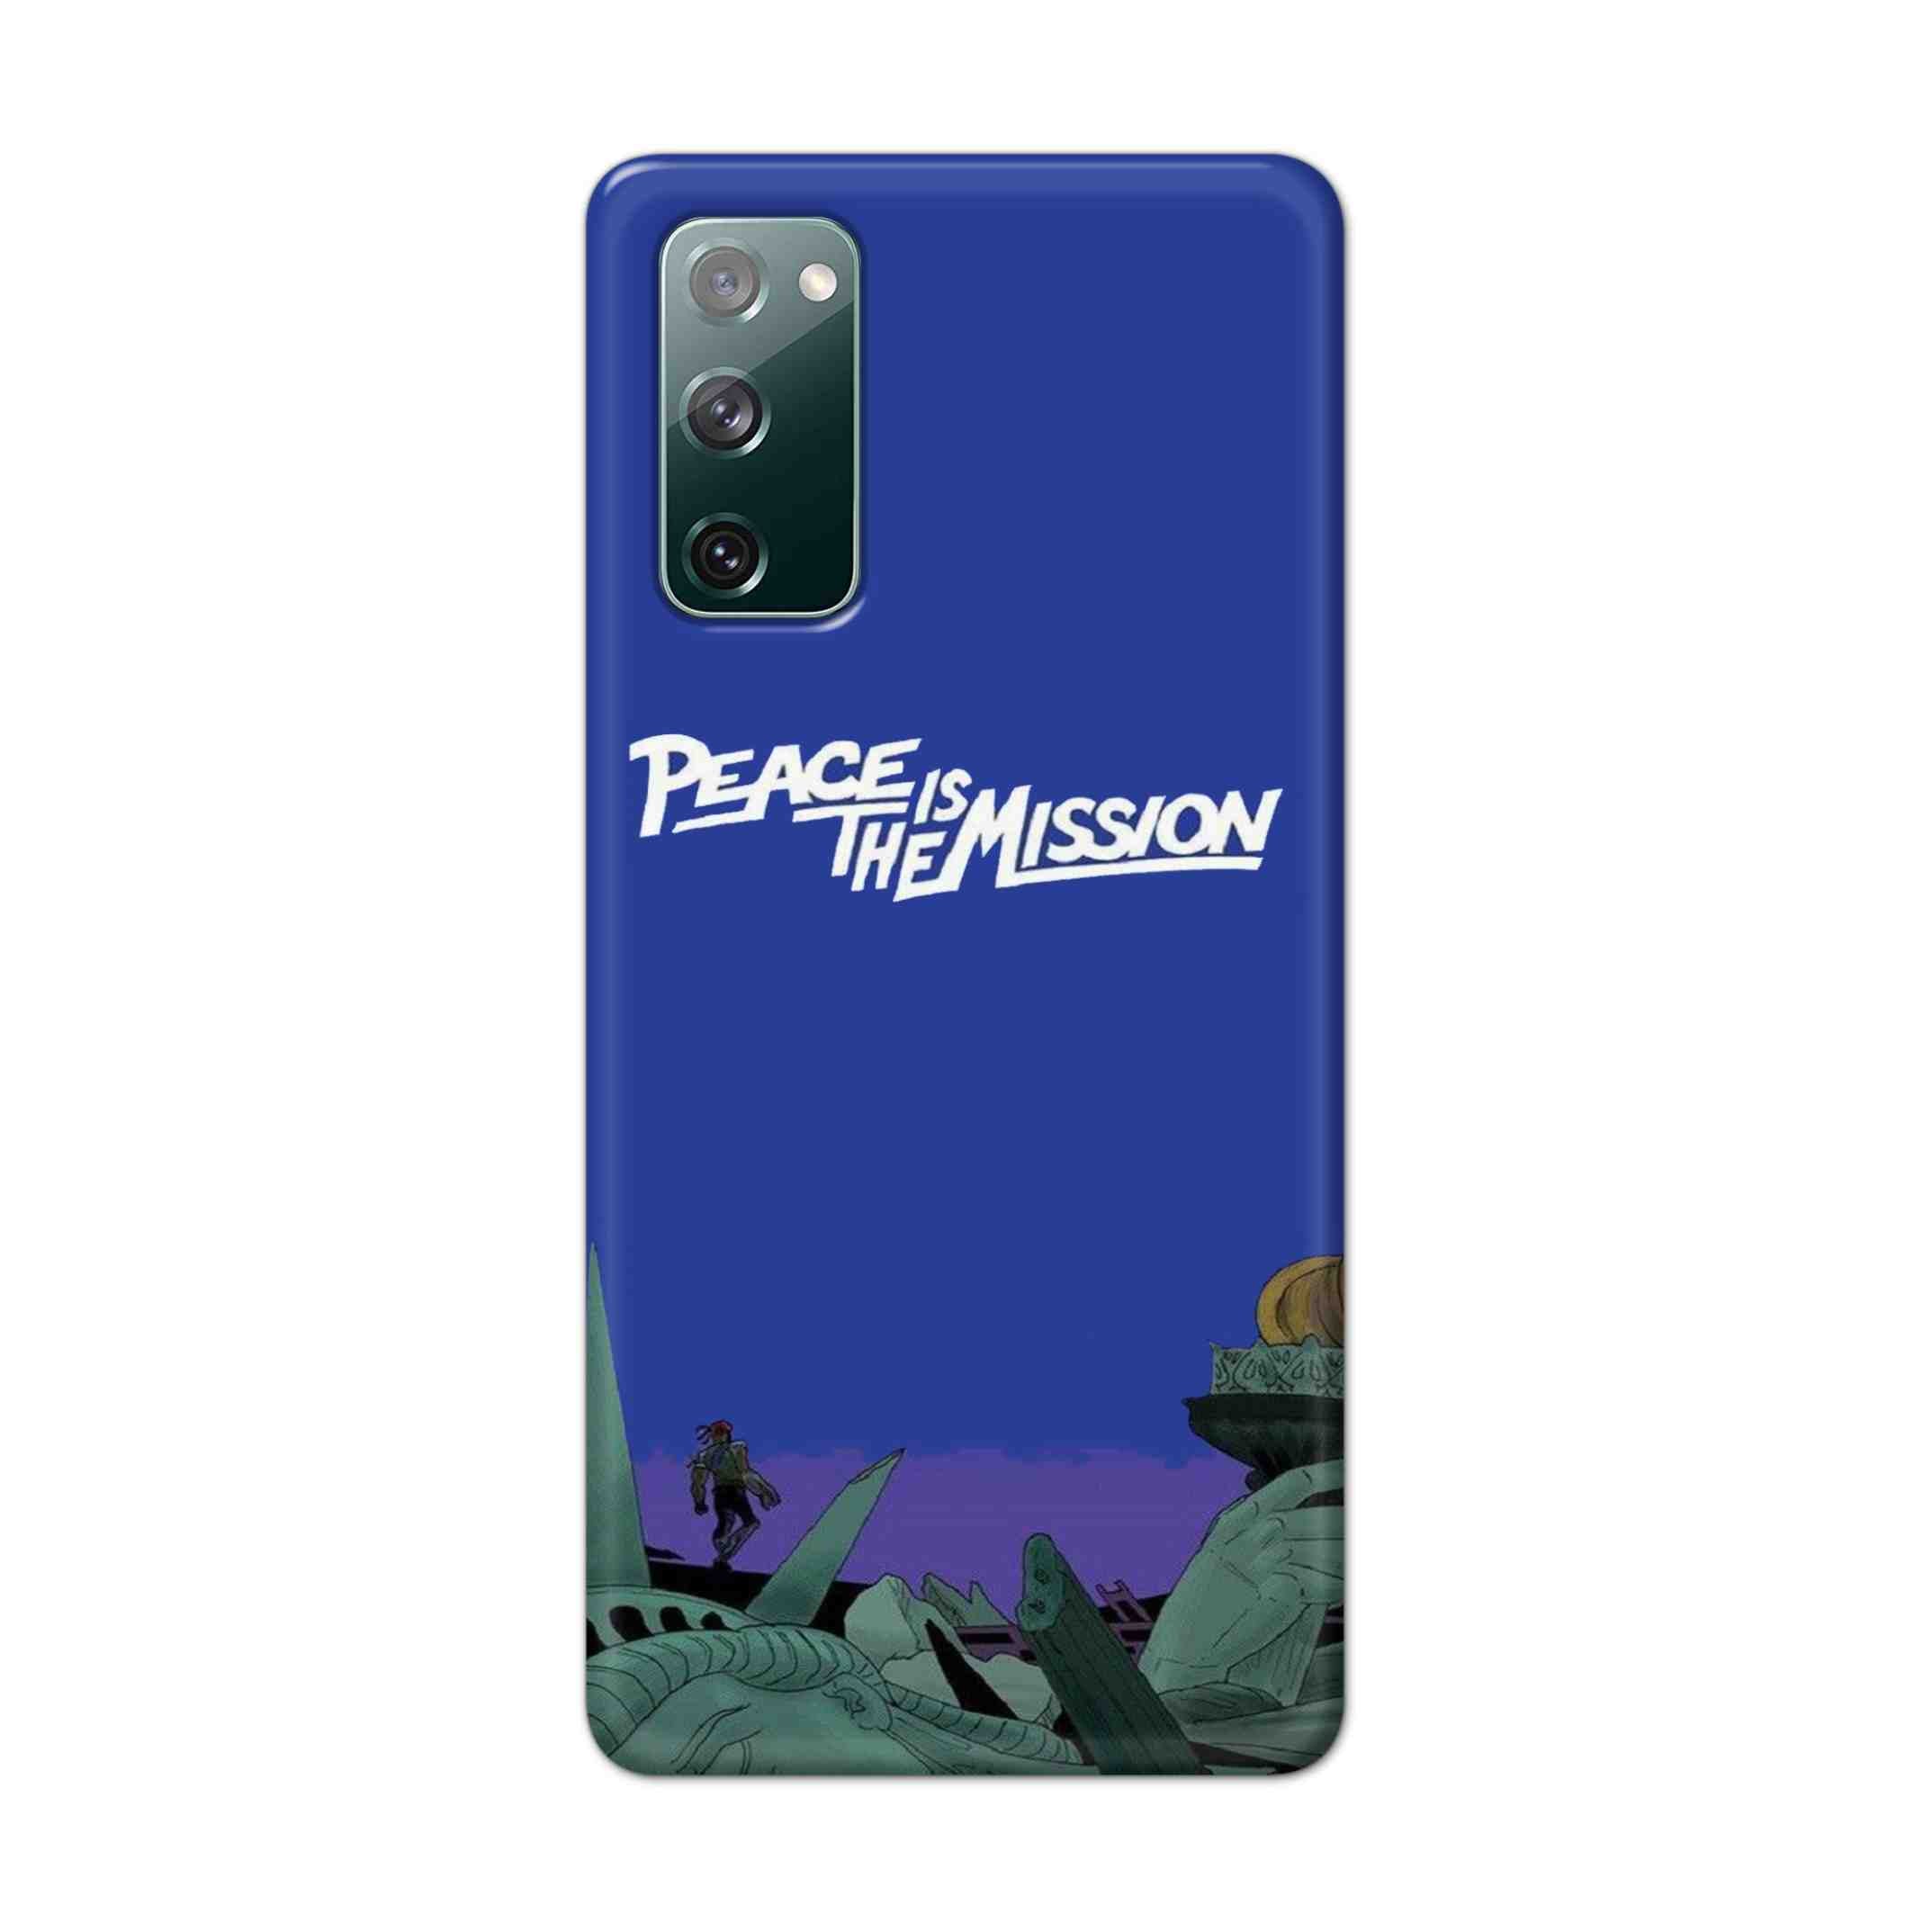 Buy Peace Is The Misson Hard Back Mobile Phone Case Cover For Samsung Galaxy S20 FE Online